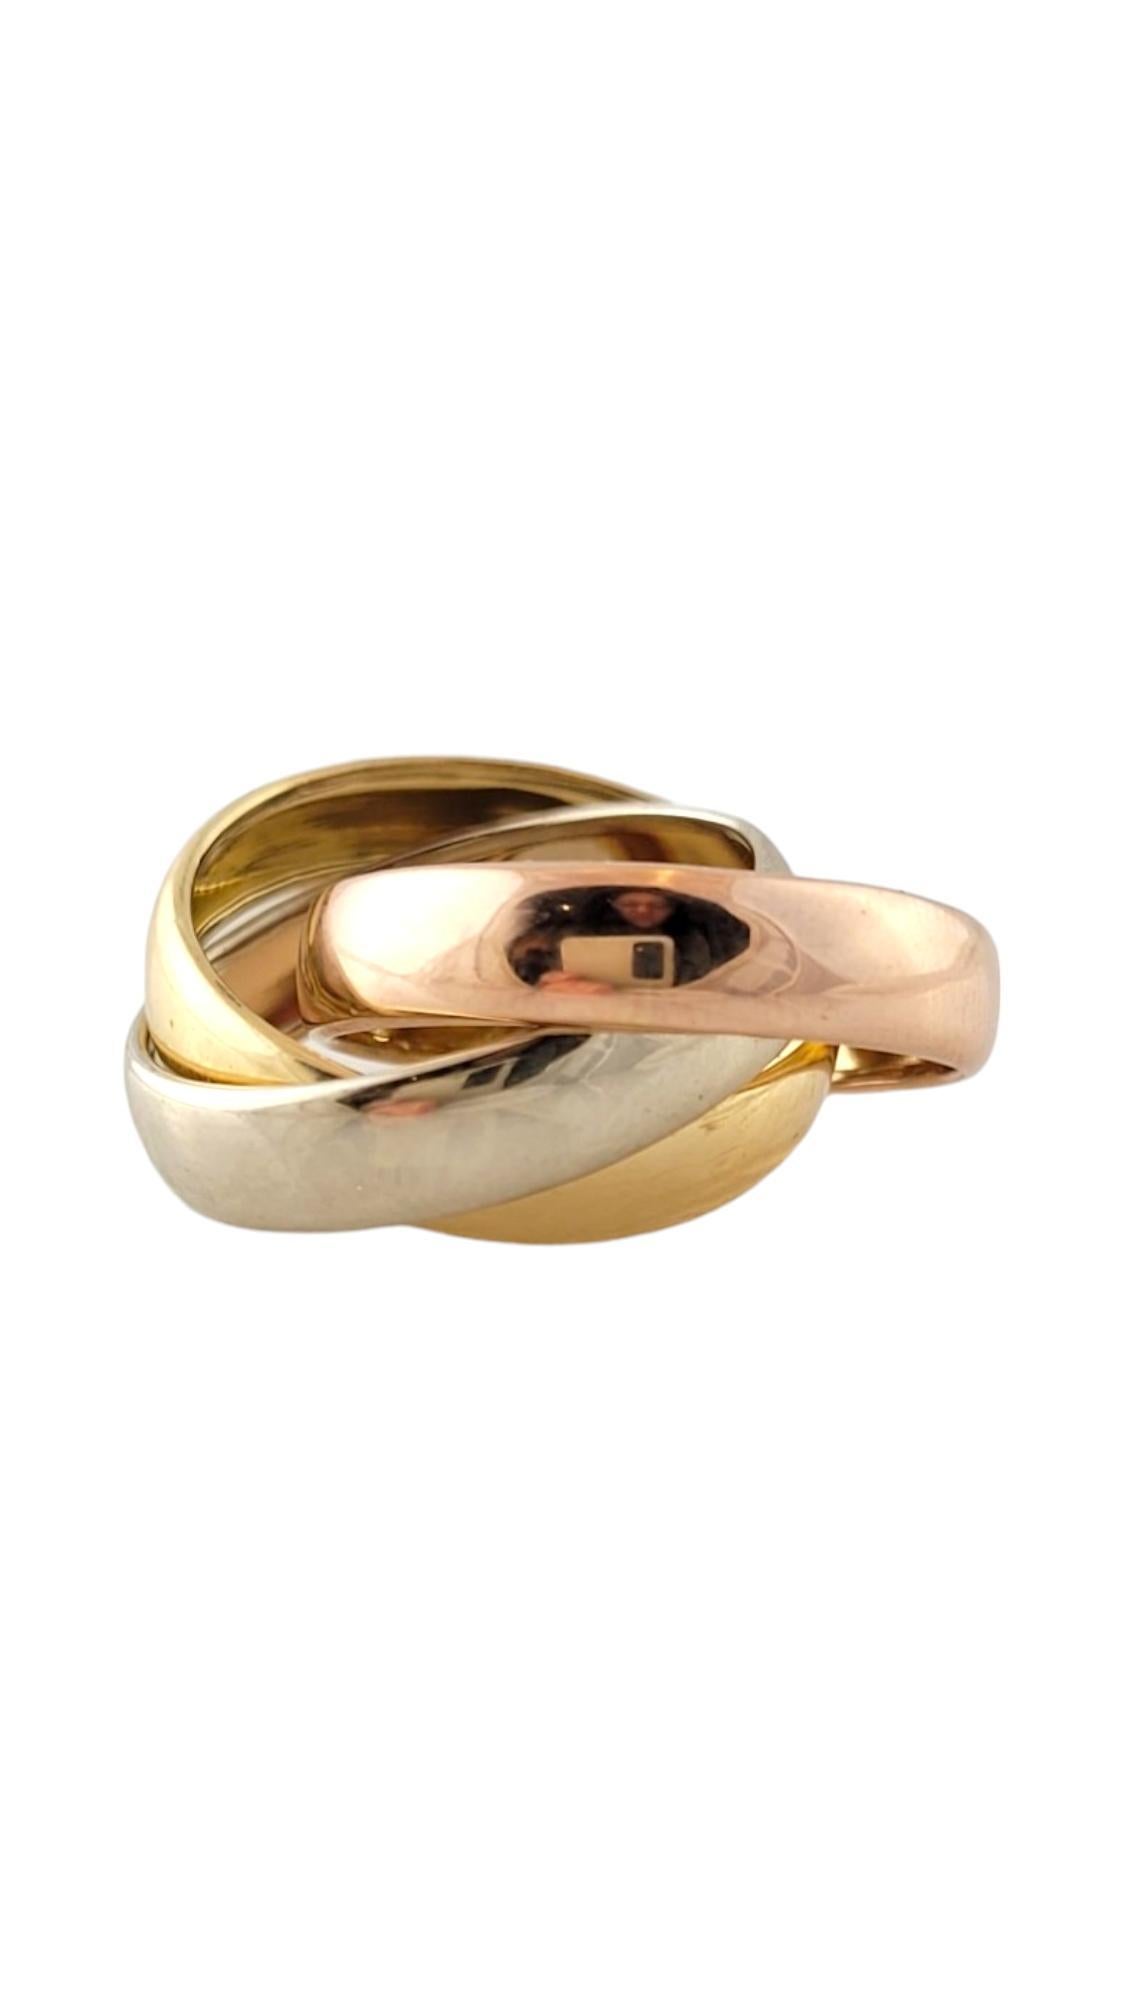 18K Tri Colored Rolling 3 Band Ring Size 8

This beautiful rolling 3 band ring is crafted from 18K yellow, rose, and white gold for a gorgeous finish!

Ring size: 8
Shank: 4.9mm (each band)

Weight: 3.83 dwt/ 5.95 g

Hallmark: 18Kt ITALY

Very good